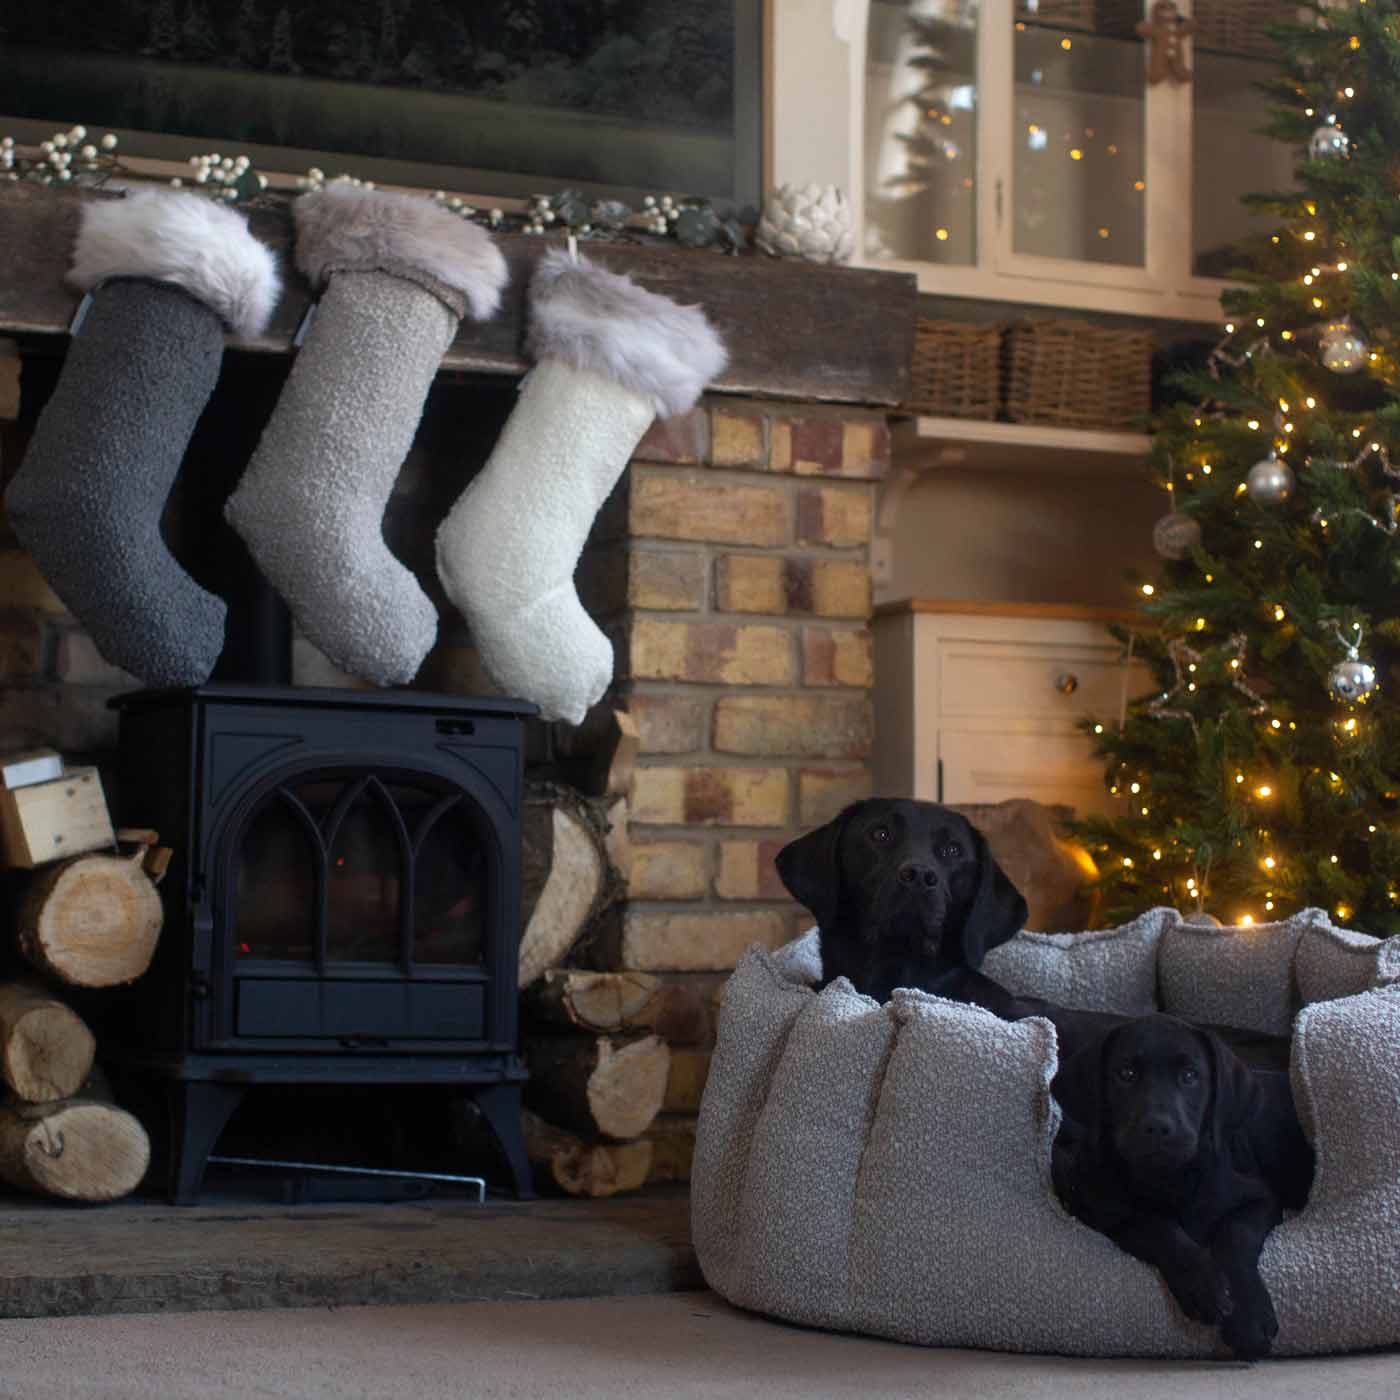 Gift your furry friend the perfect pet Christmas gift with our beautifully crafted Christmas Stocking Sock, fill and gift your pet this festive holiday with the most wholesome gifts for Christmas! Available now in stunning Boucle collection - Granite, Mink, Ivory at Lords & Labradors US